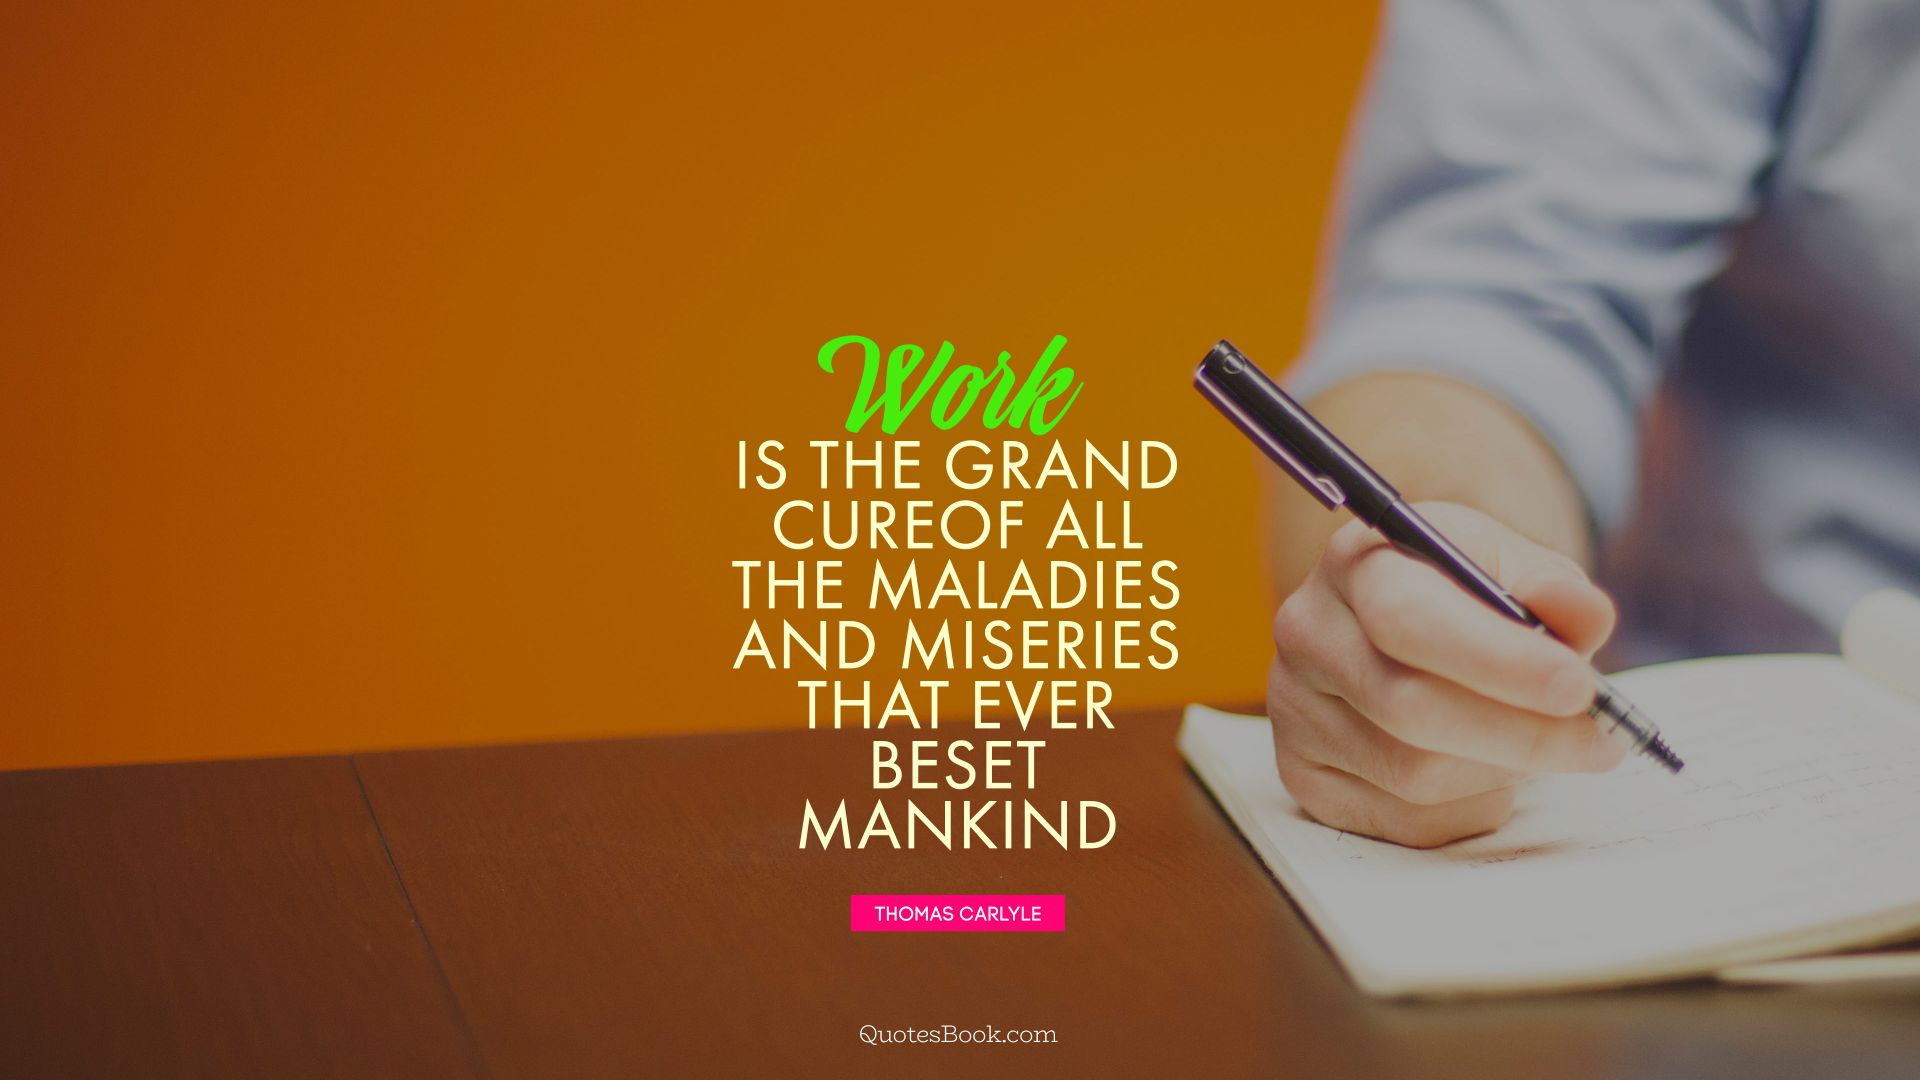 Work is the grand cure of all the maladies and miseries that ever beset mankind. - Quote by Thomas Carlyle